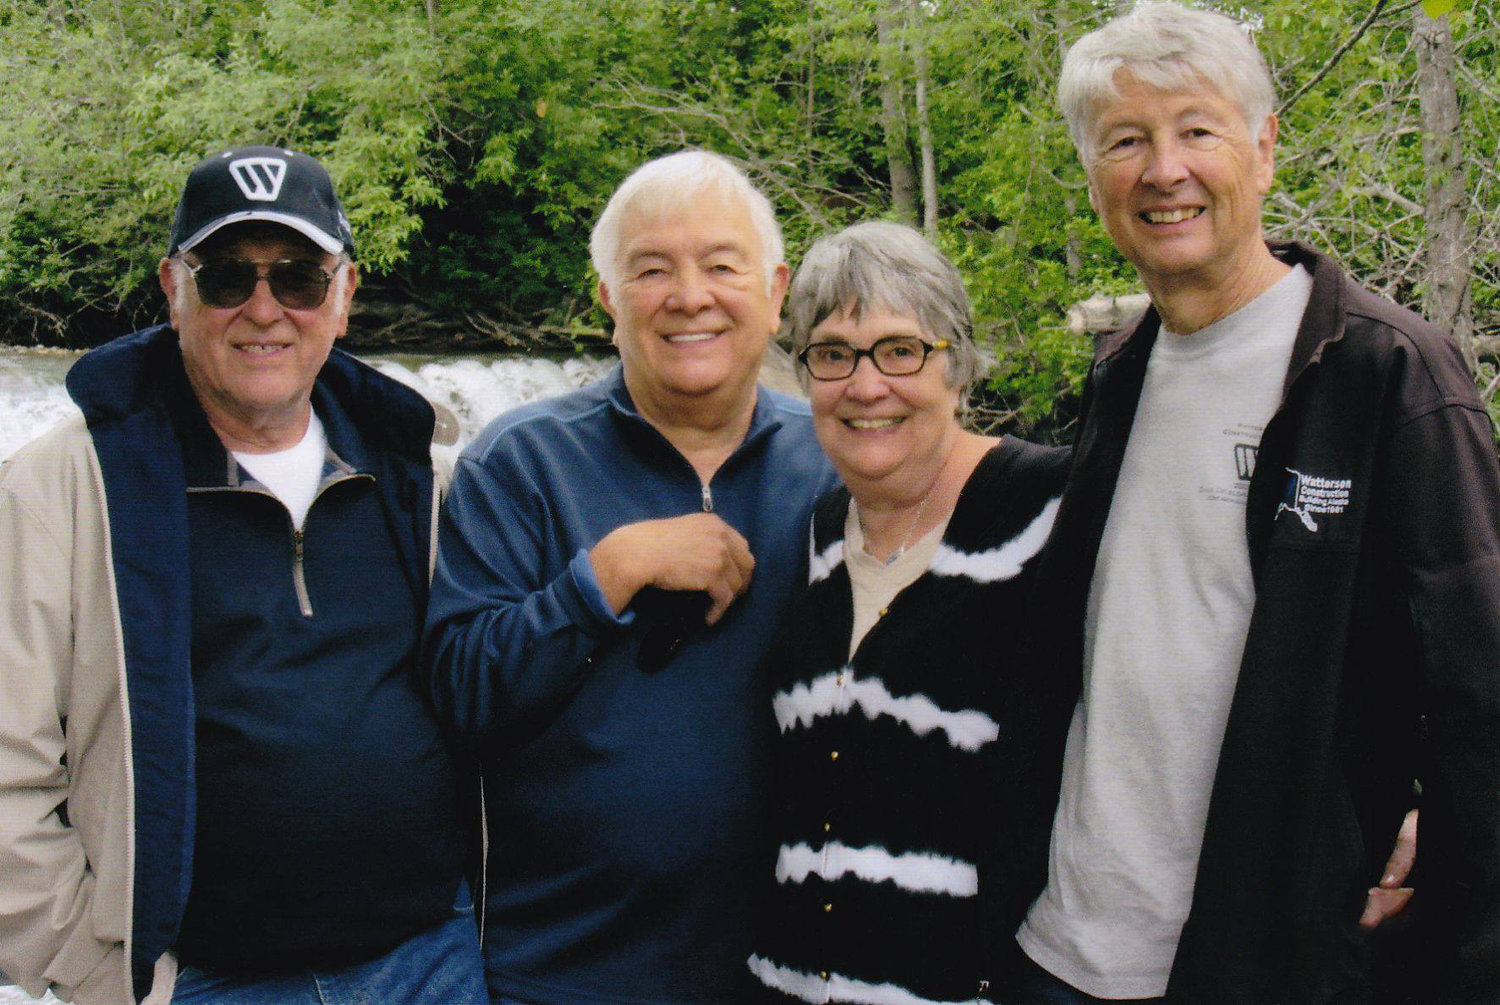 Four Watterson siblings in particular ­— Ed, Bill, Marilyn and Jim — were recognized. They’ll also be honored as part of the college’s 2021 commencement celebration.